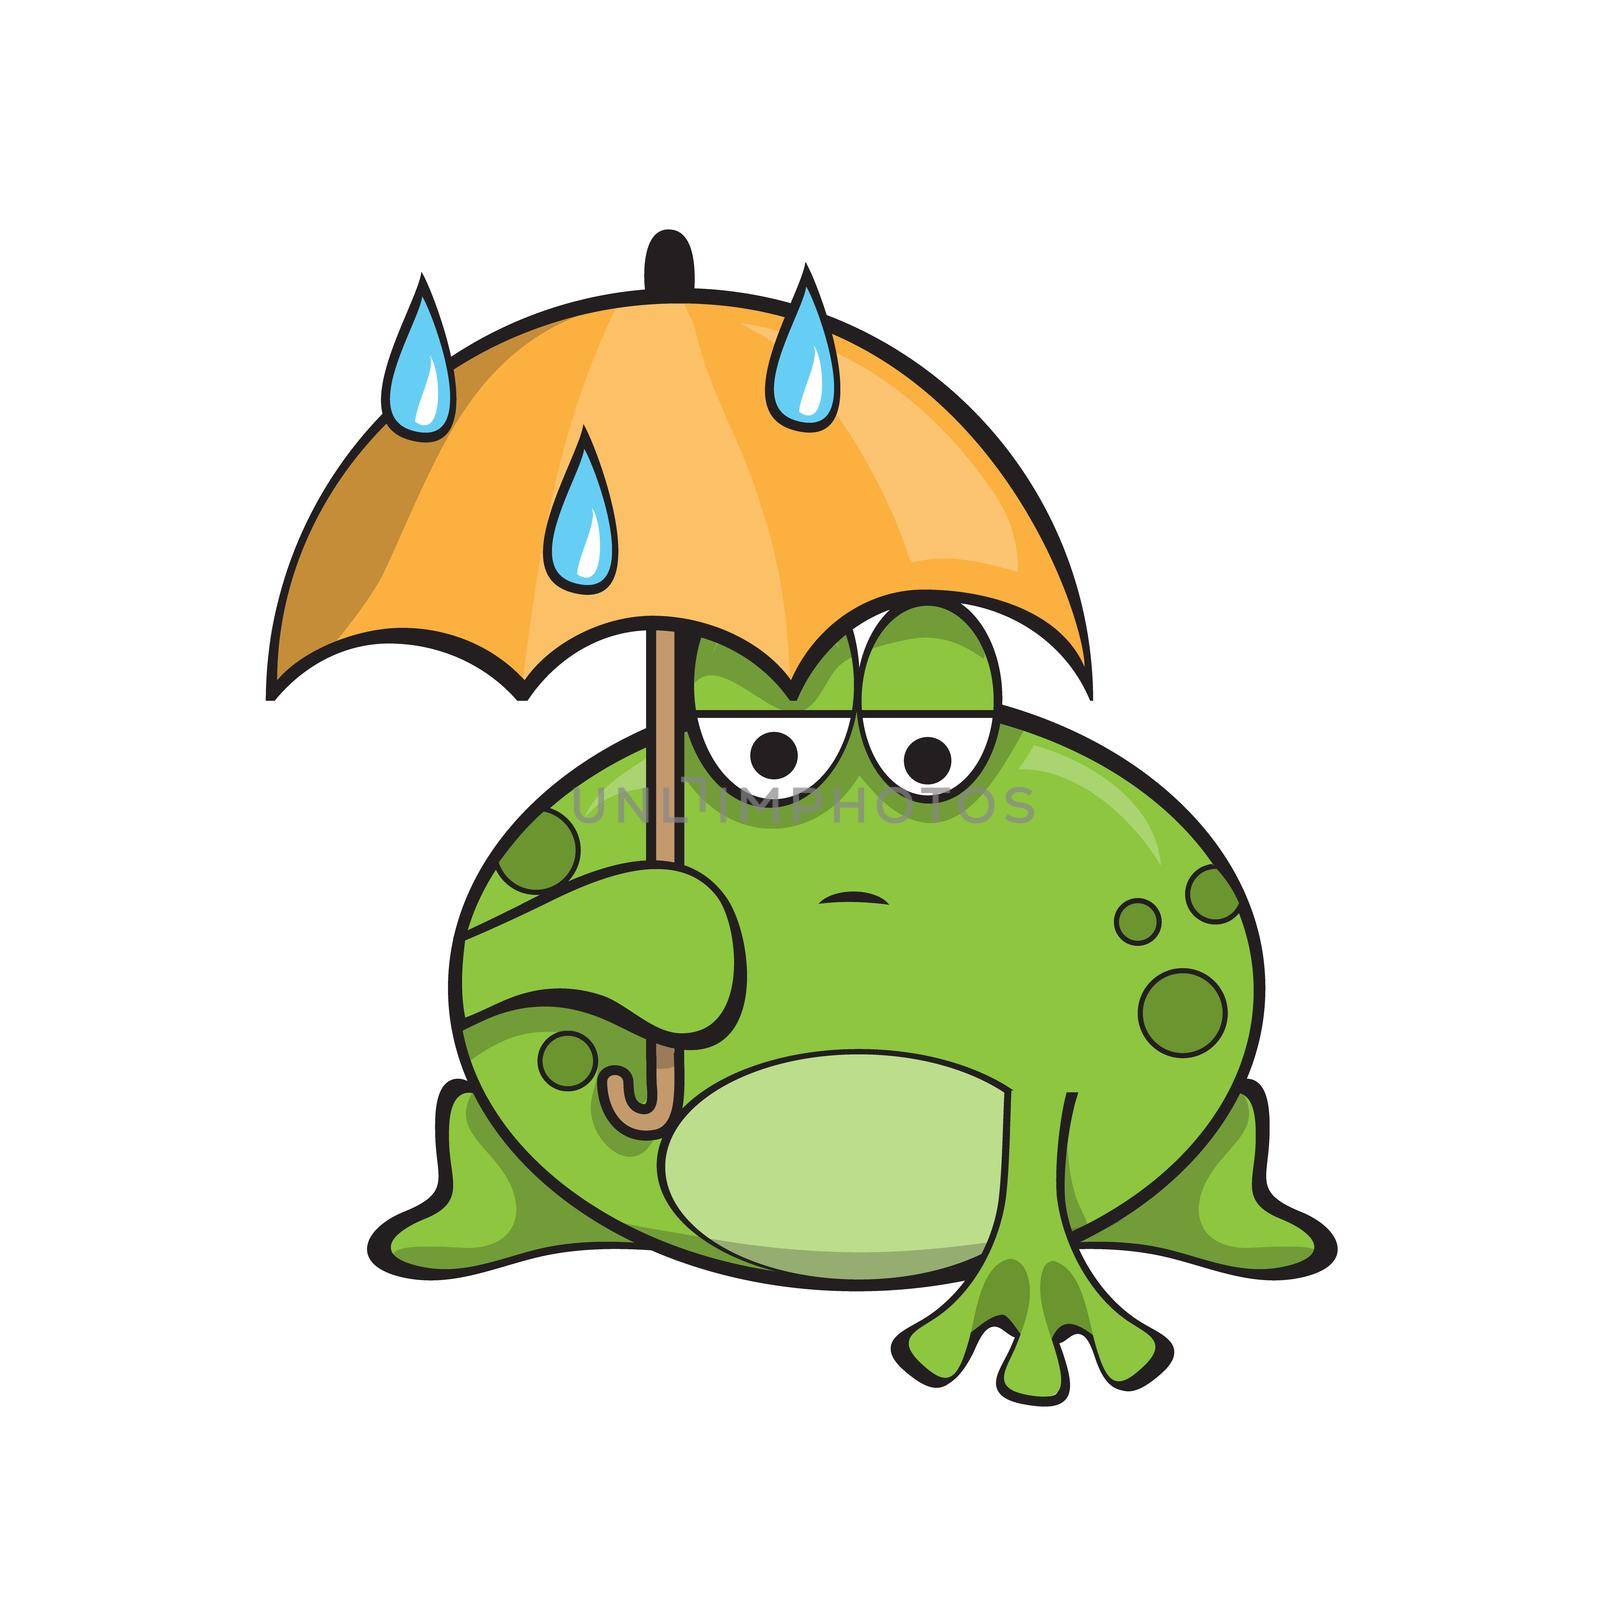 Sad frog under an umbrella. Rainy weather. Cartoon funny character on a white background. Vector illustration.